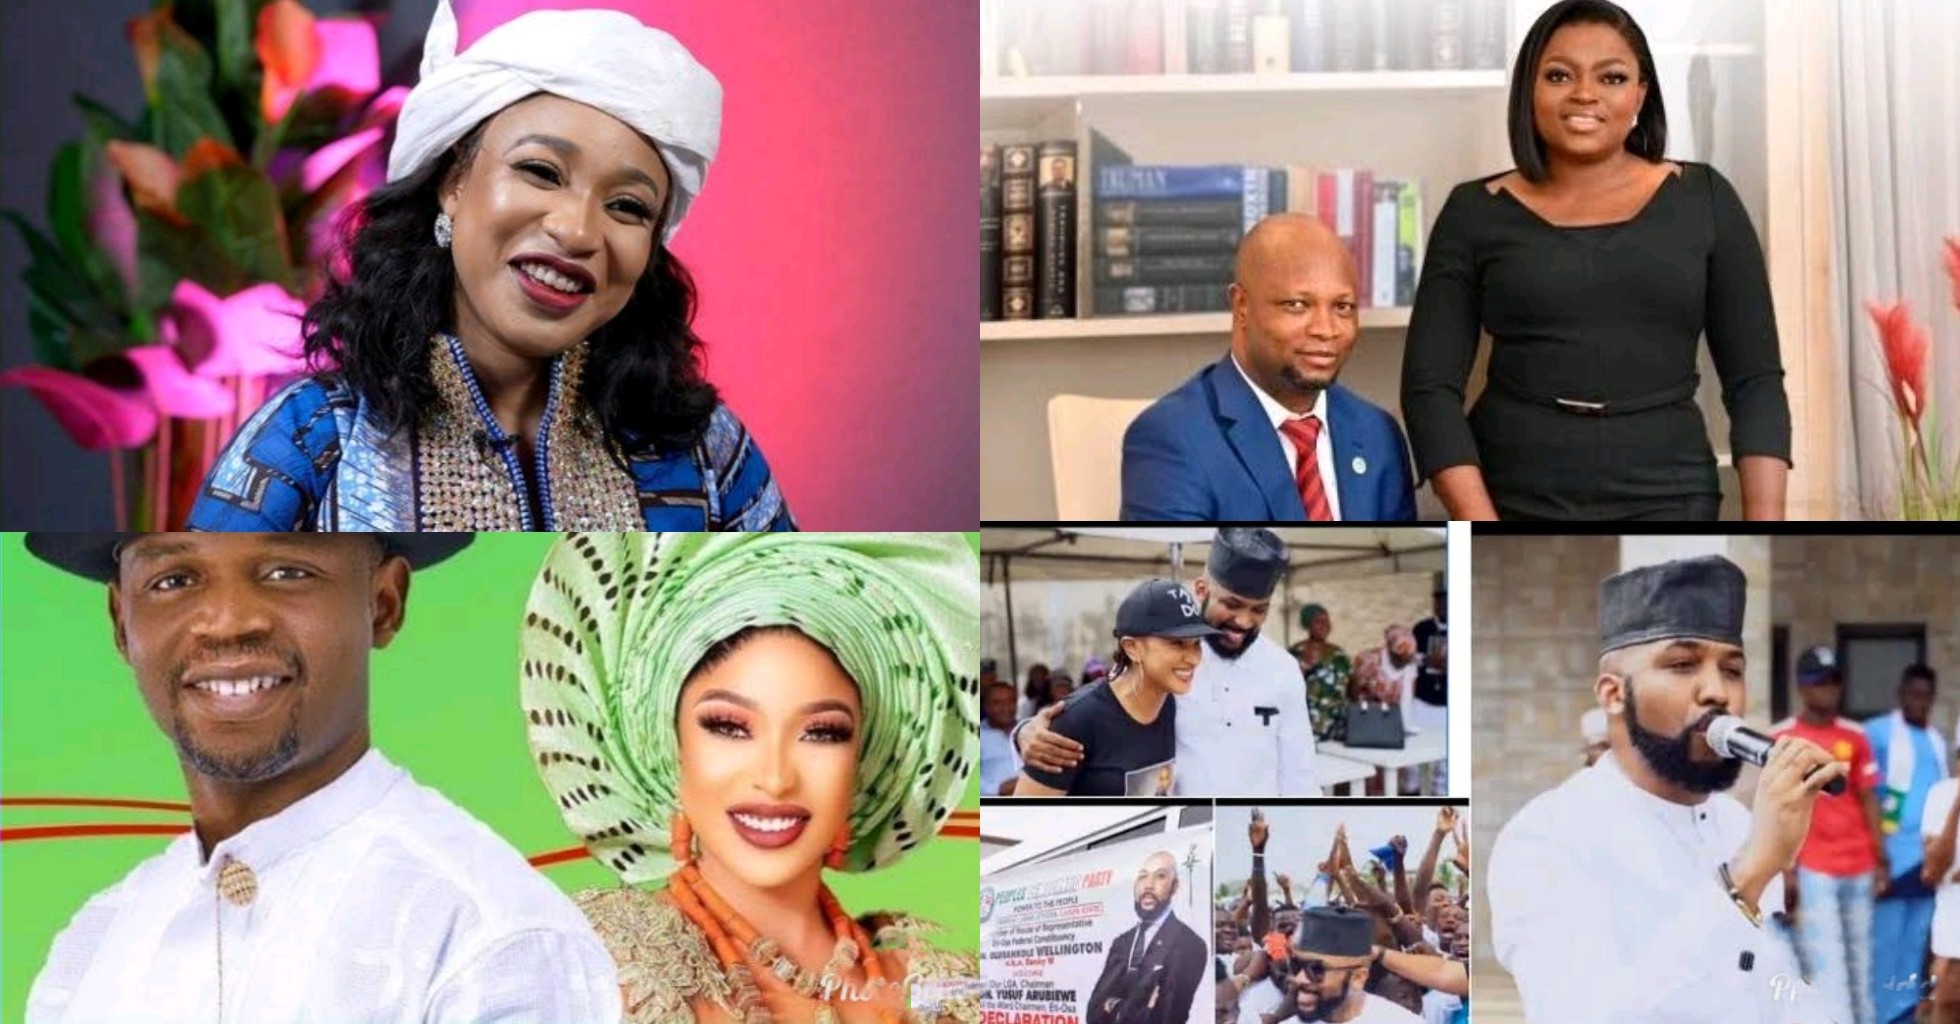 Tonto Dikeh quits Nollywood, speaks on Funke Akindele, Banky W running for political offices